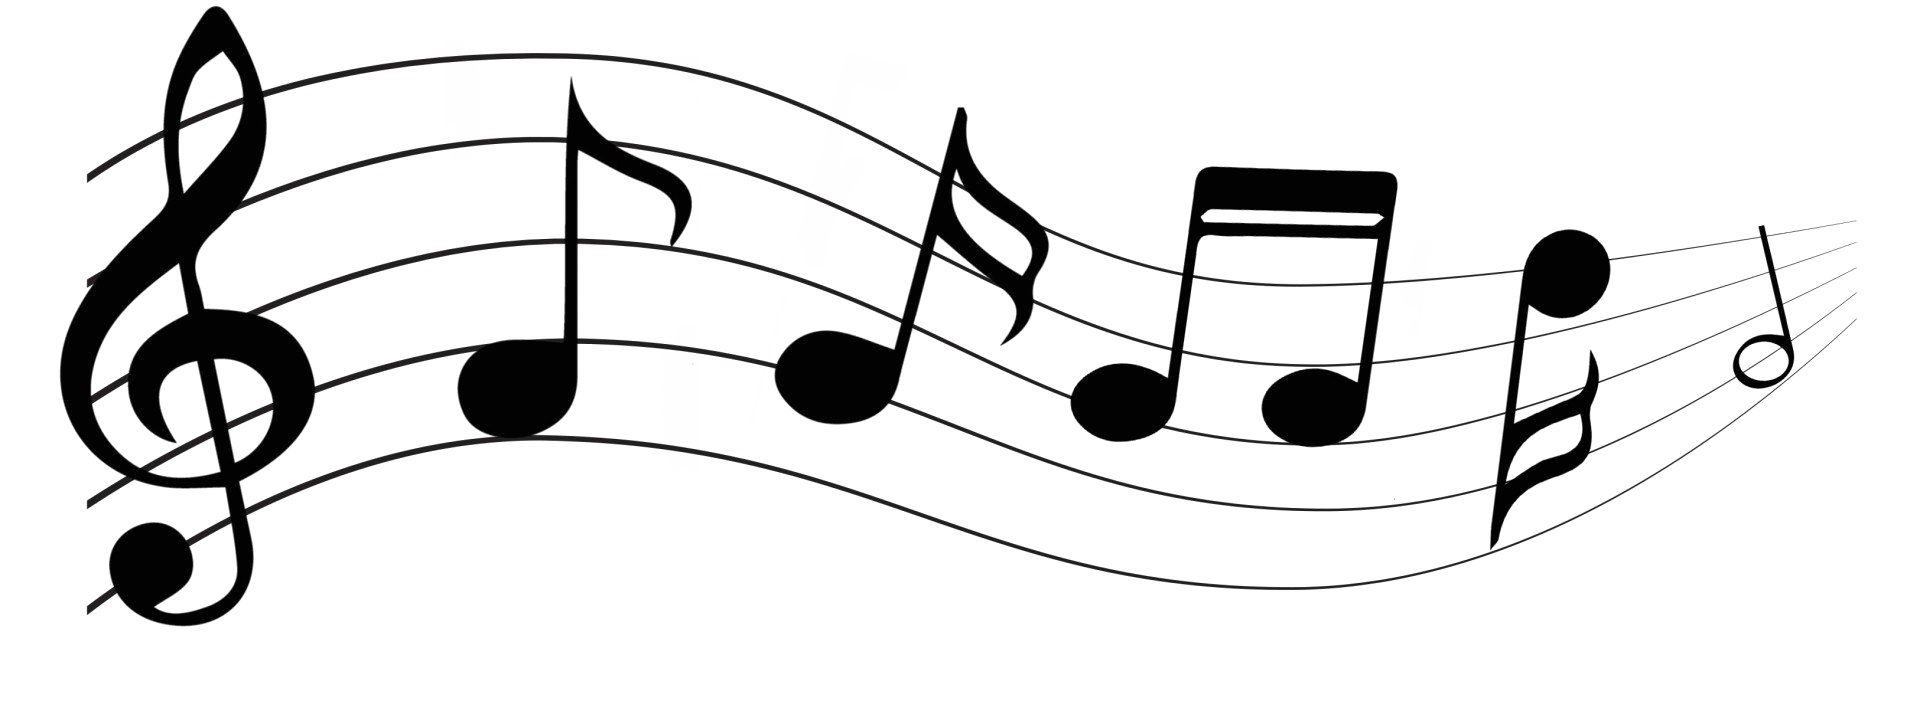 Musical Notation Symbol Images Free Clipart HD PNG Image